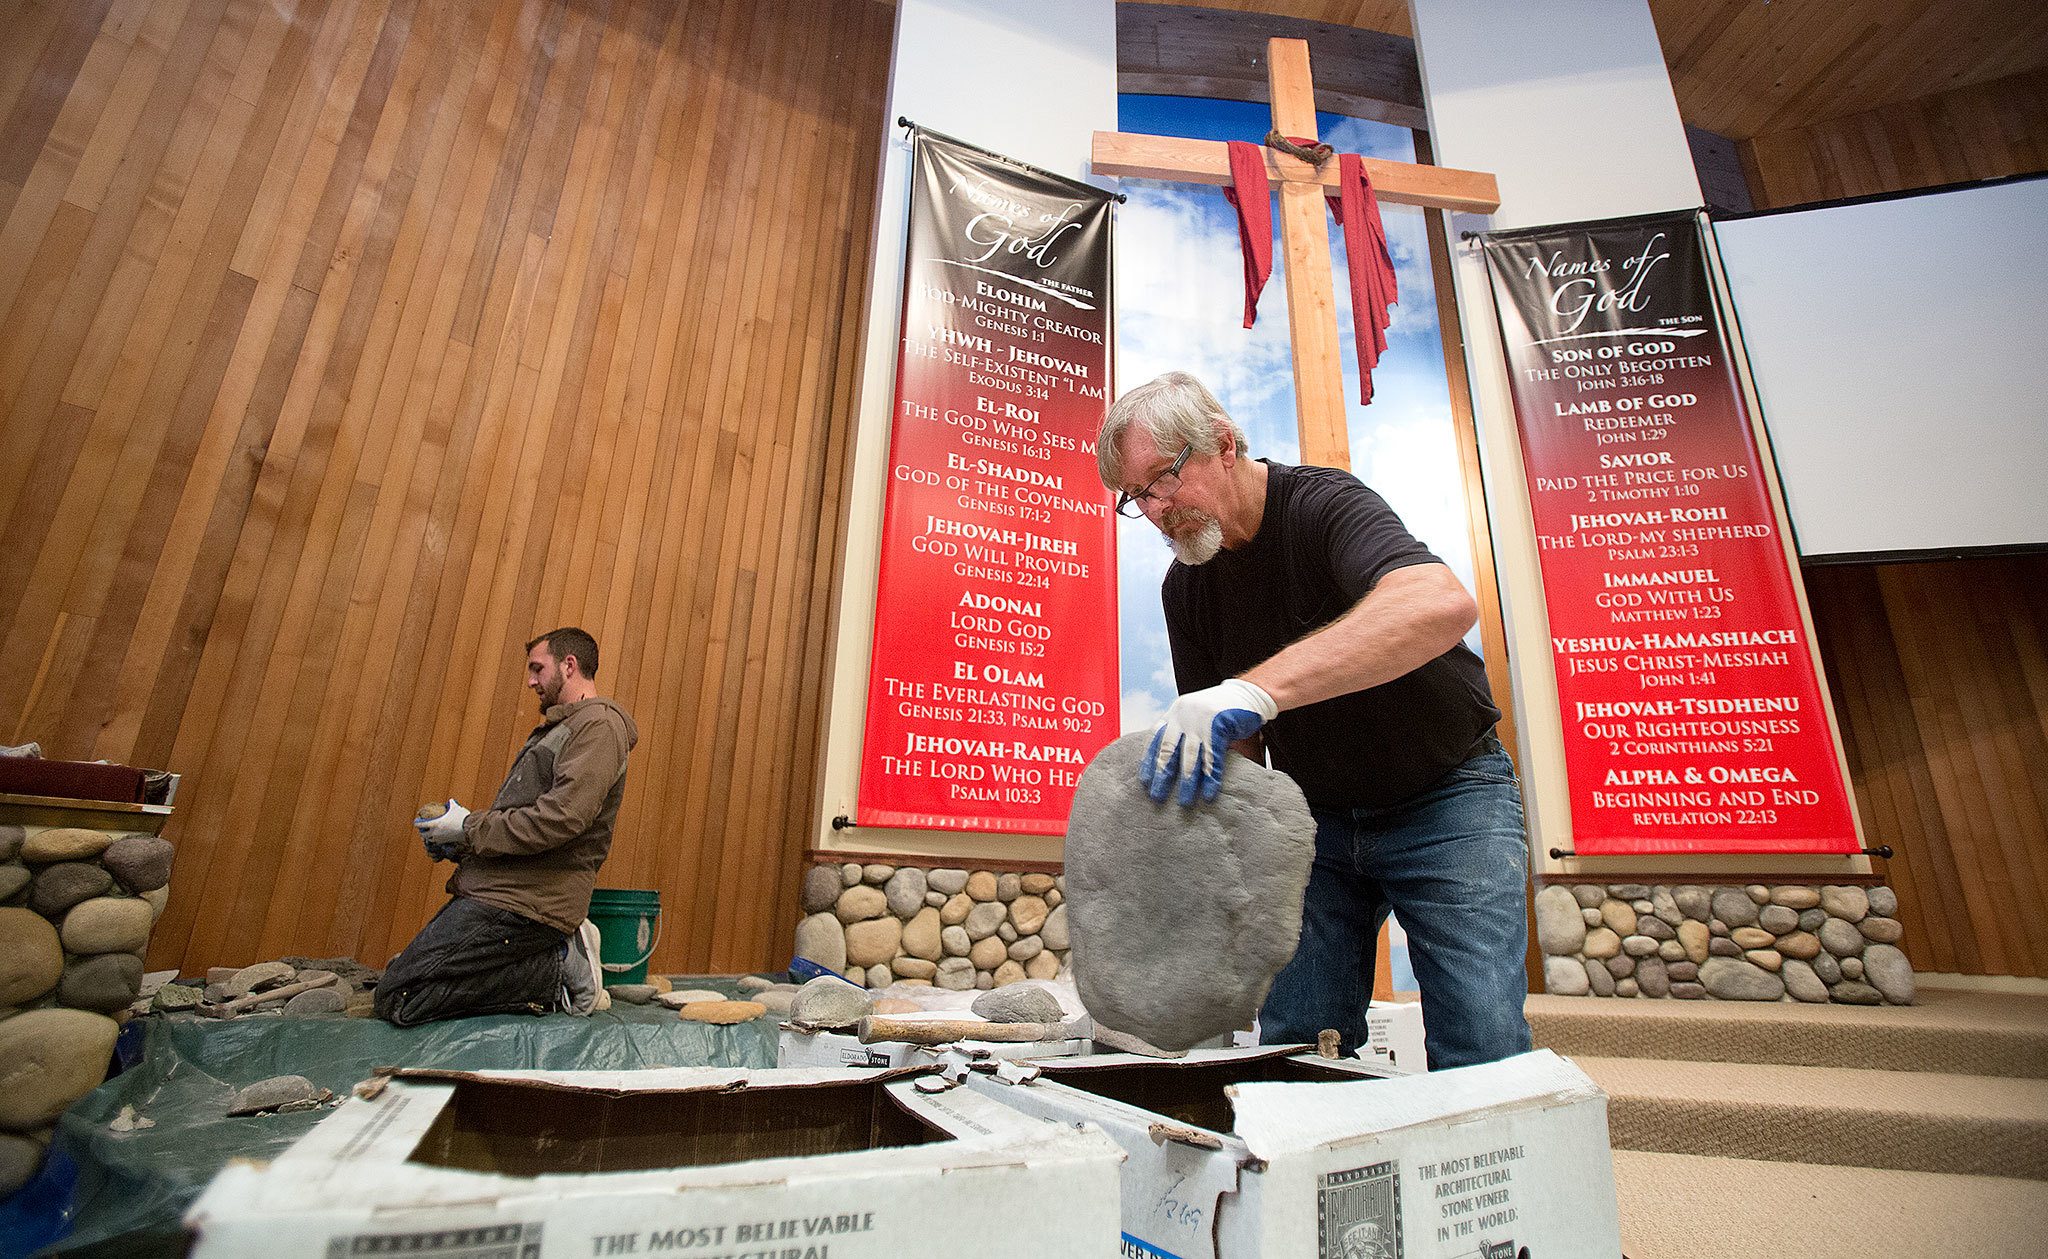 Mason Chuck Hein, of Chuck’s Masonry, picks through boxes of river rock to find the right piece for lining the baptistry at Calvary Baptist Church on Colby in Everett on Wednesday as his son, Harley, works along with him. (Andy Bronson / The Herald)